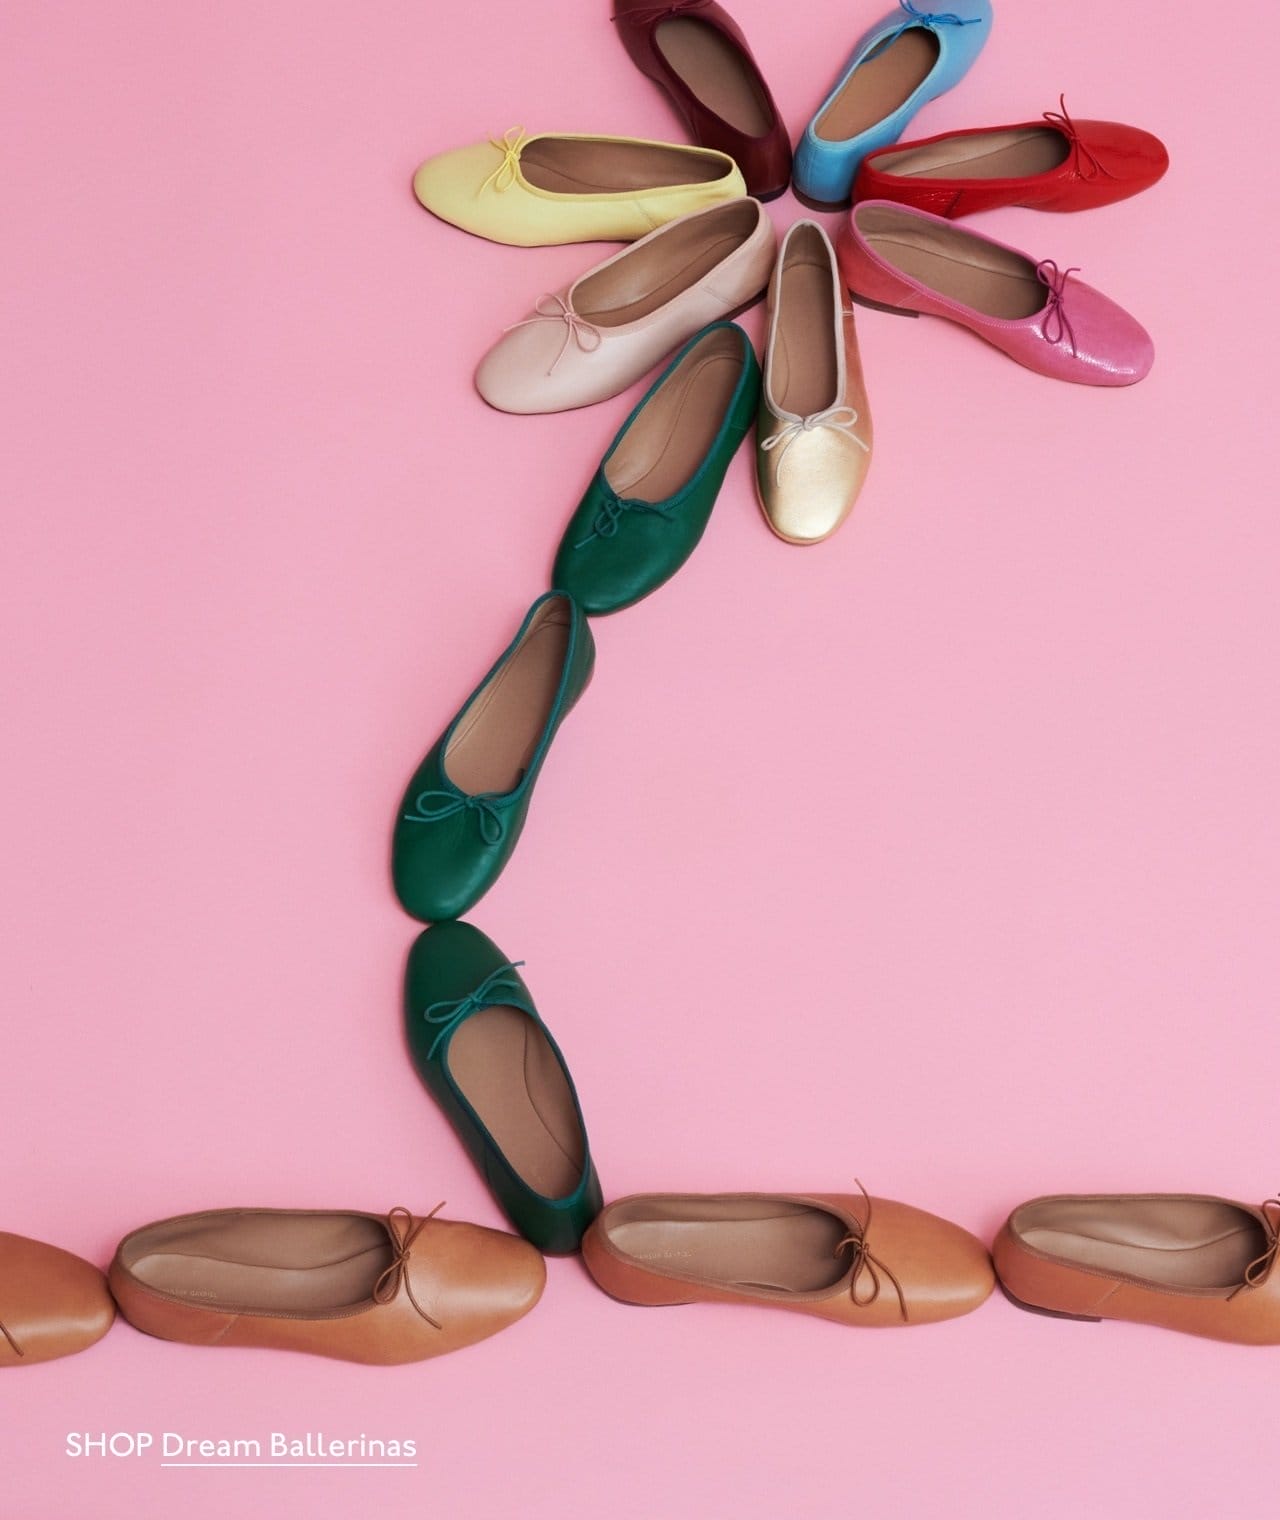 Happy Spring. A new season just blossomed. Shop our rainbow of bags and shoes crafted from soft Italian leathers. Pictured: a rainbow of Dream Ballerinas.